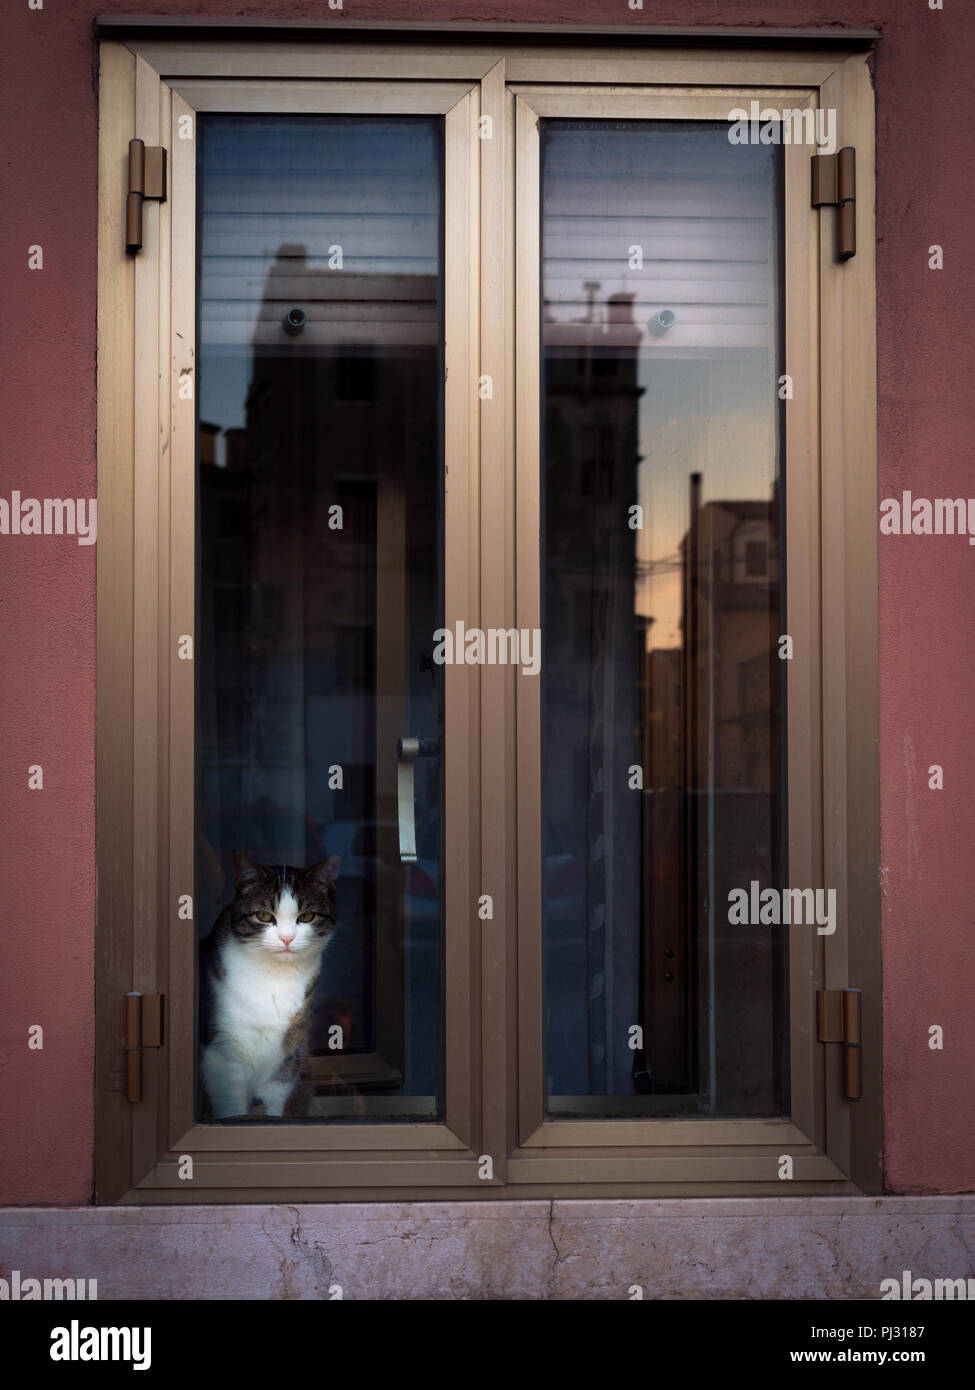 Cute gray and white cat leaning on glass and looking out window. Stock Photo